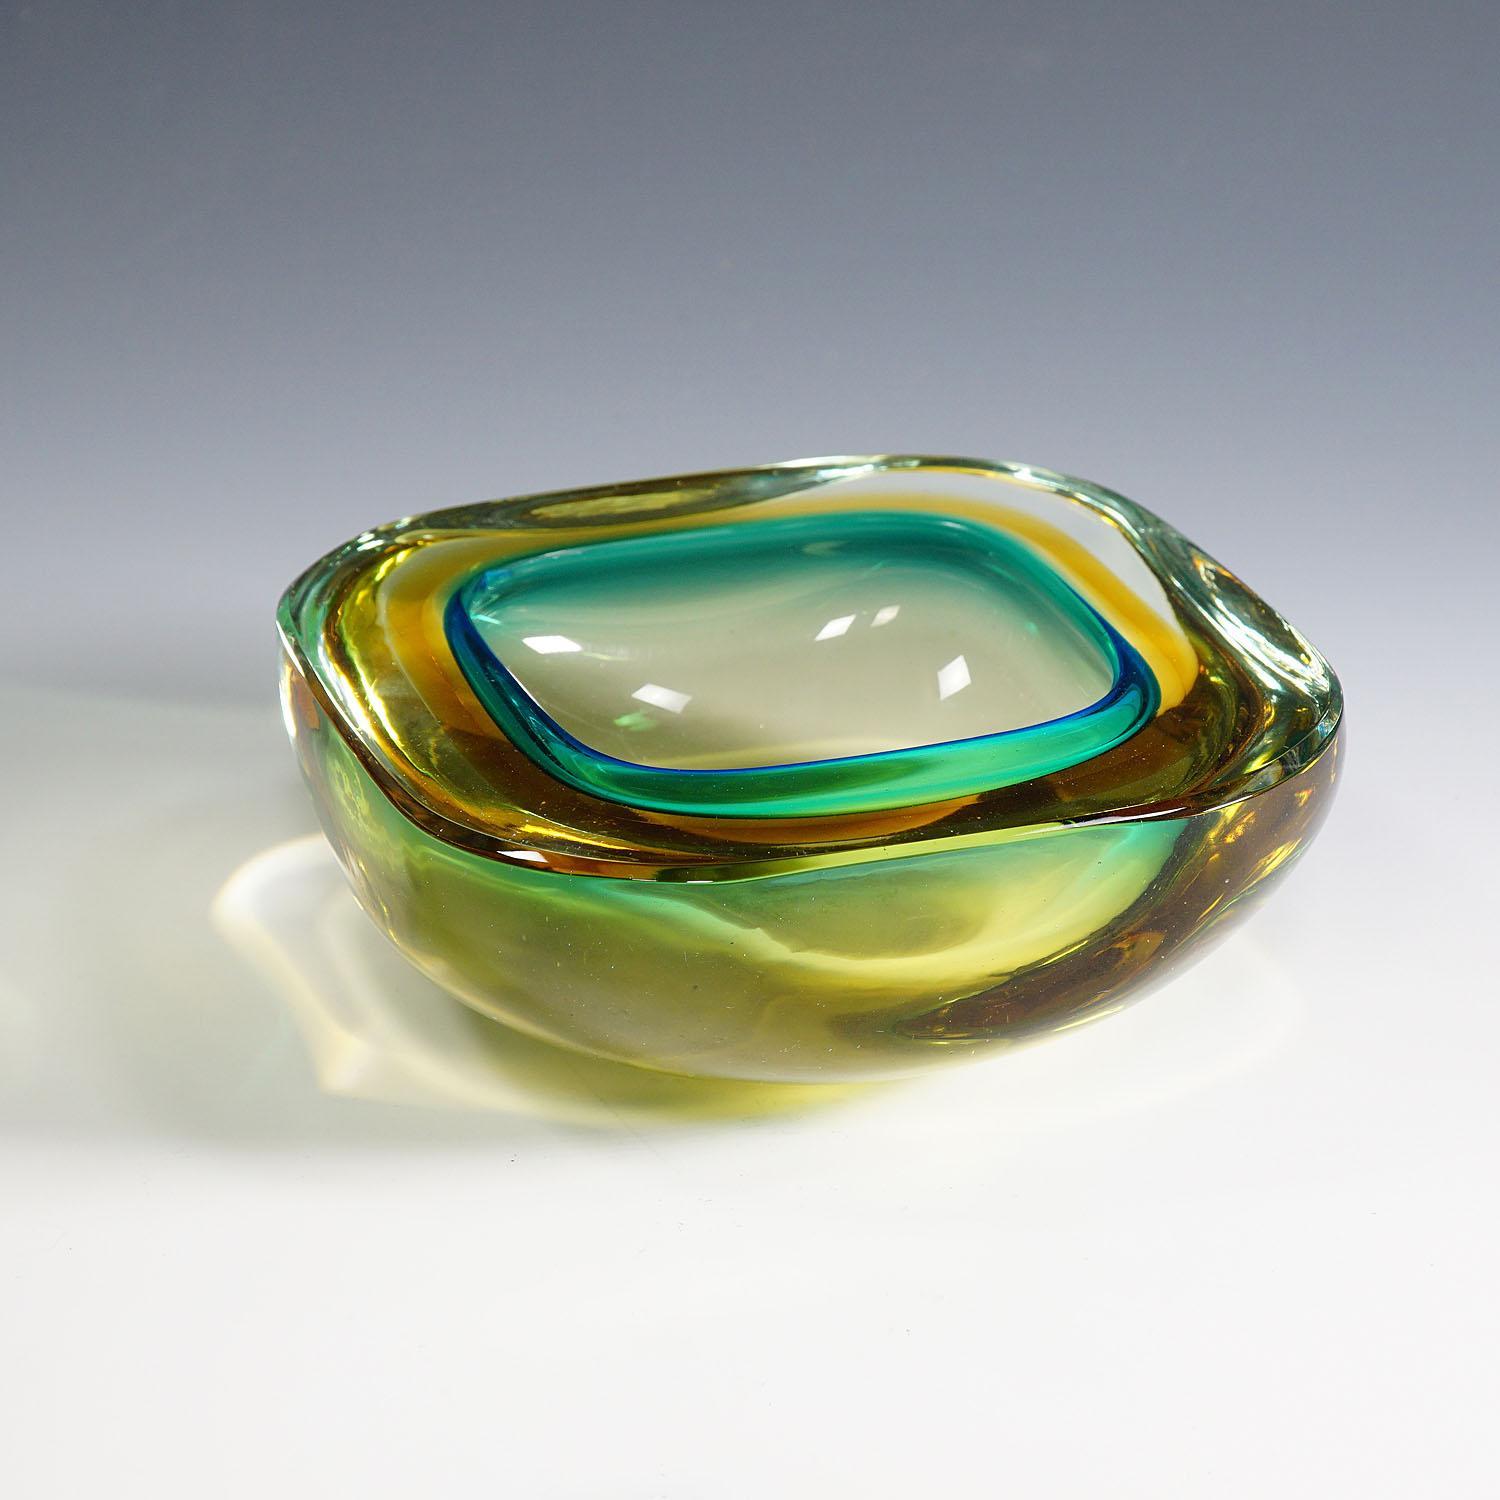 Heavy Seguso Vetri d'Arte (attr.) Murano Art glass bowl 1950s

A heavy Murano glass bowl most probably manufactured by Seguso Vetri d'Arte circa 1950s. Thick green and yellow glass with clear overlay. A classical design of the 50s which highlights